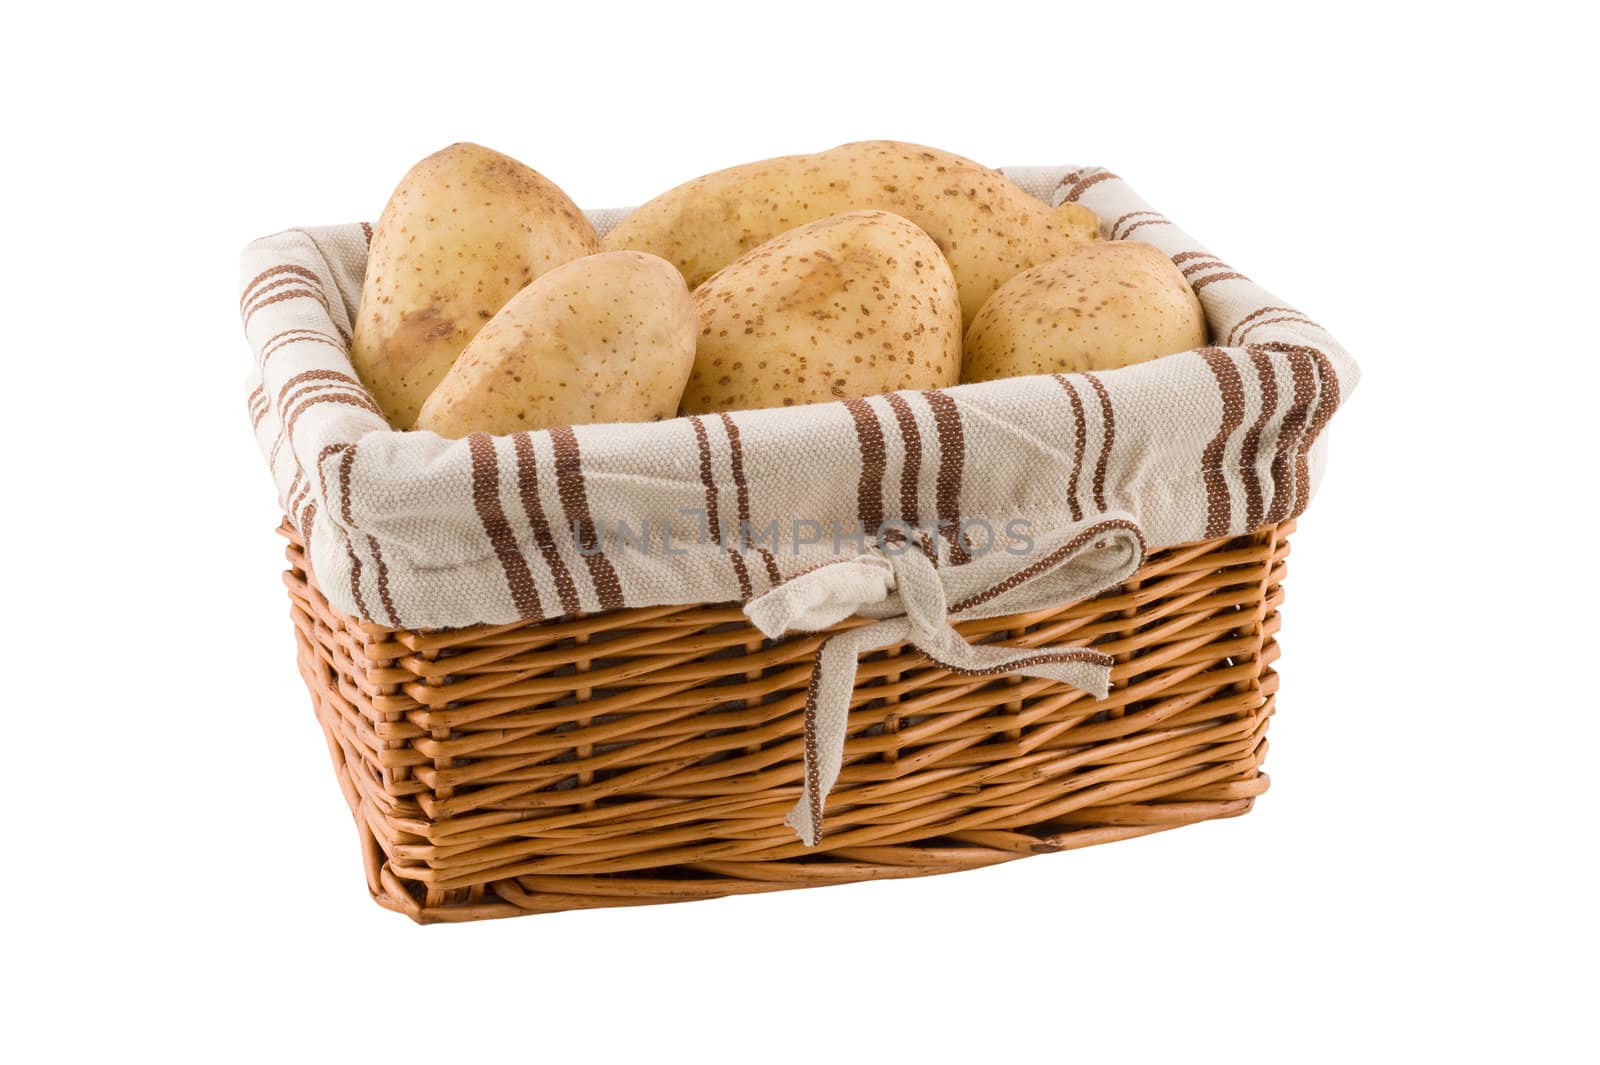 Potatoes in a woven basket isolated on a white background, clipping path.
